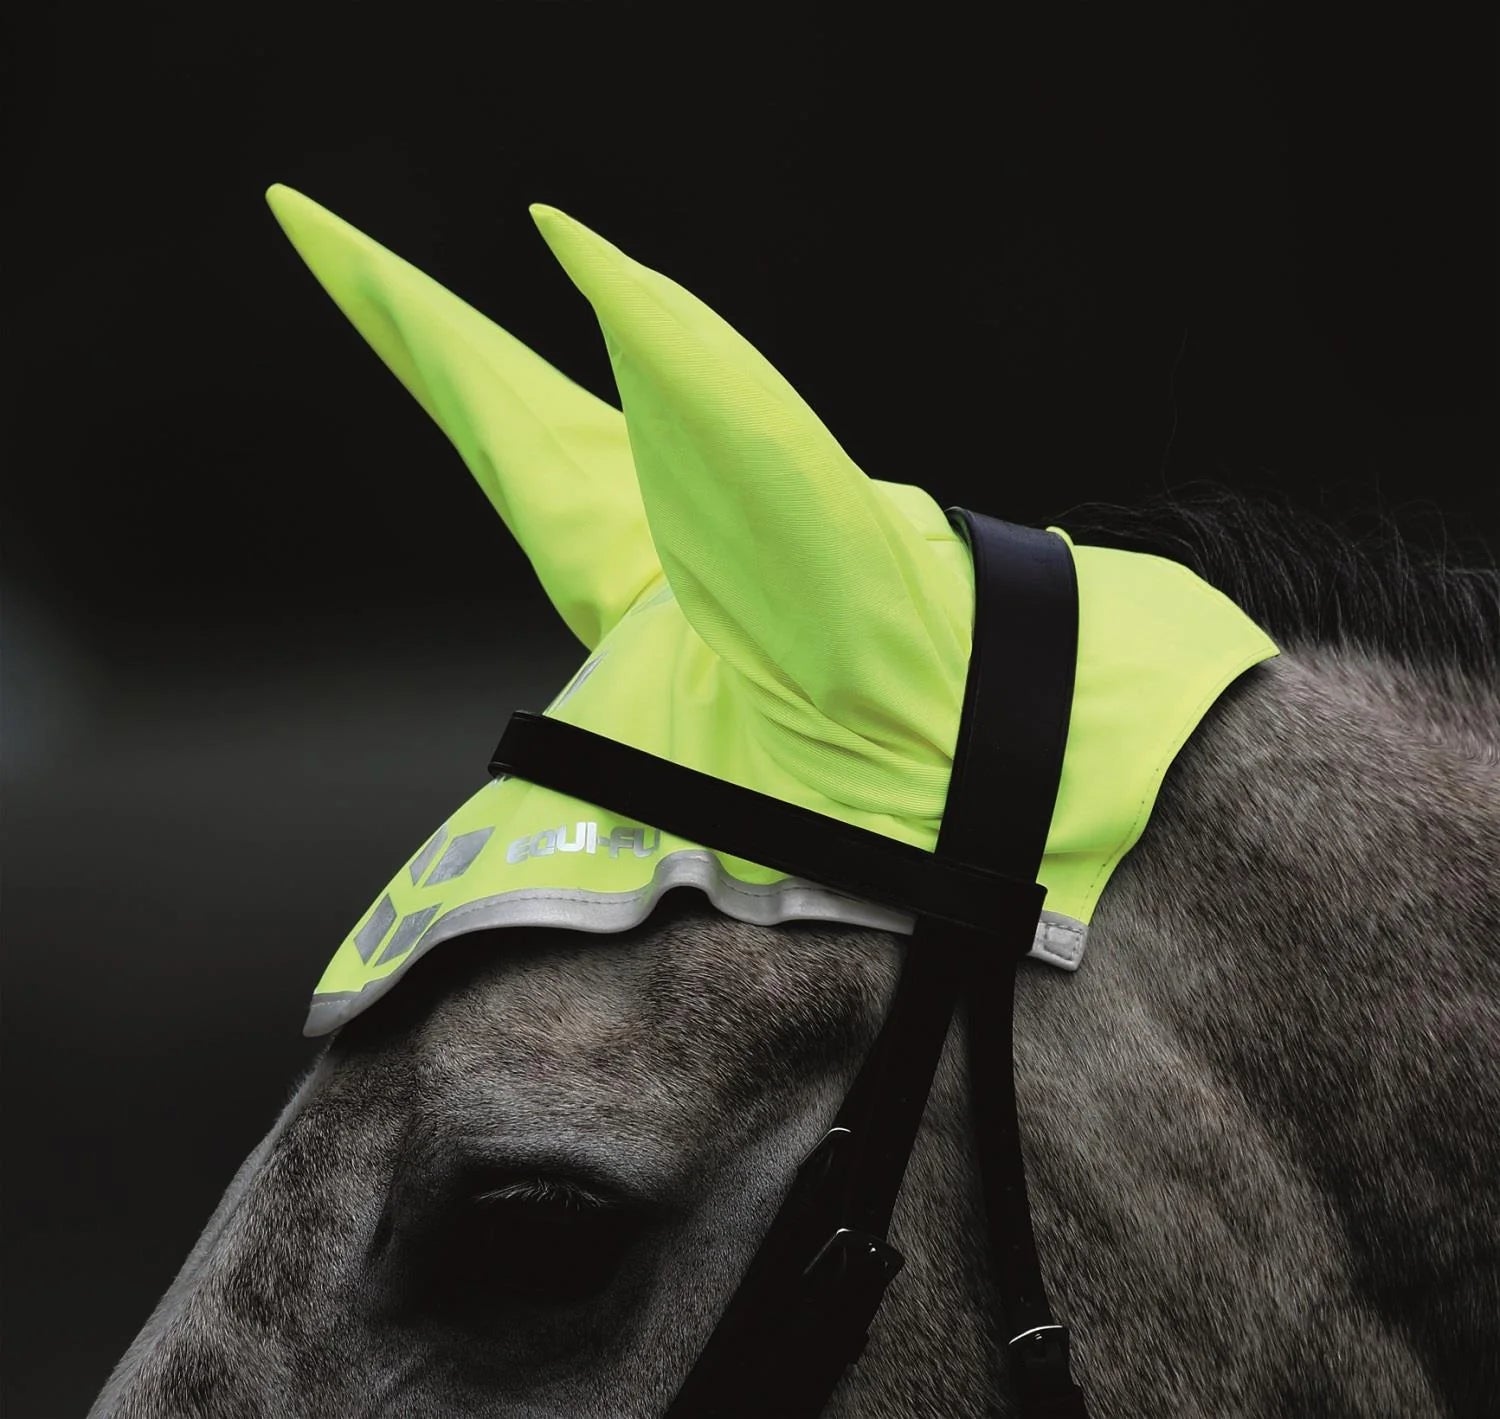 Stay Safe and Visible while Riding with Hi-Viz!